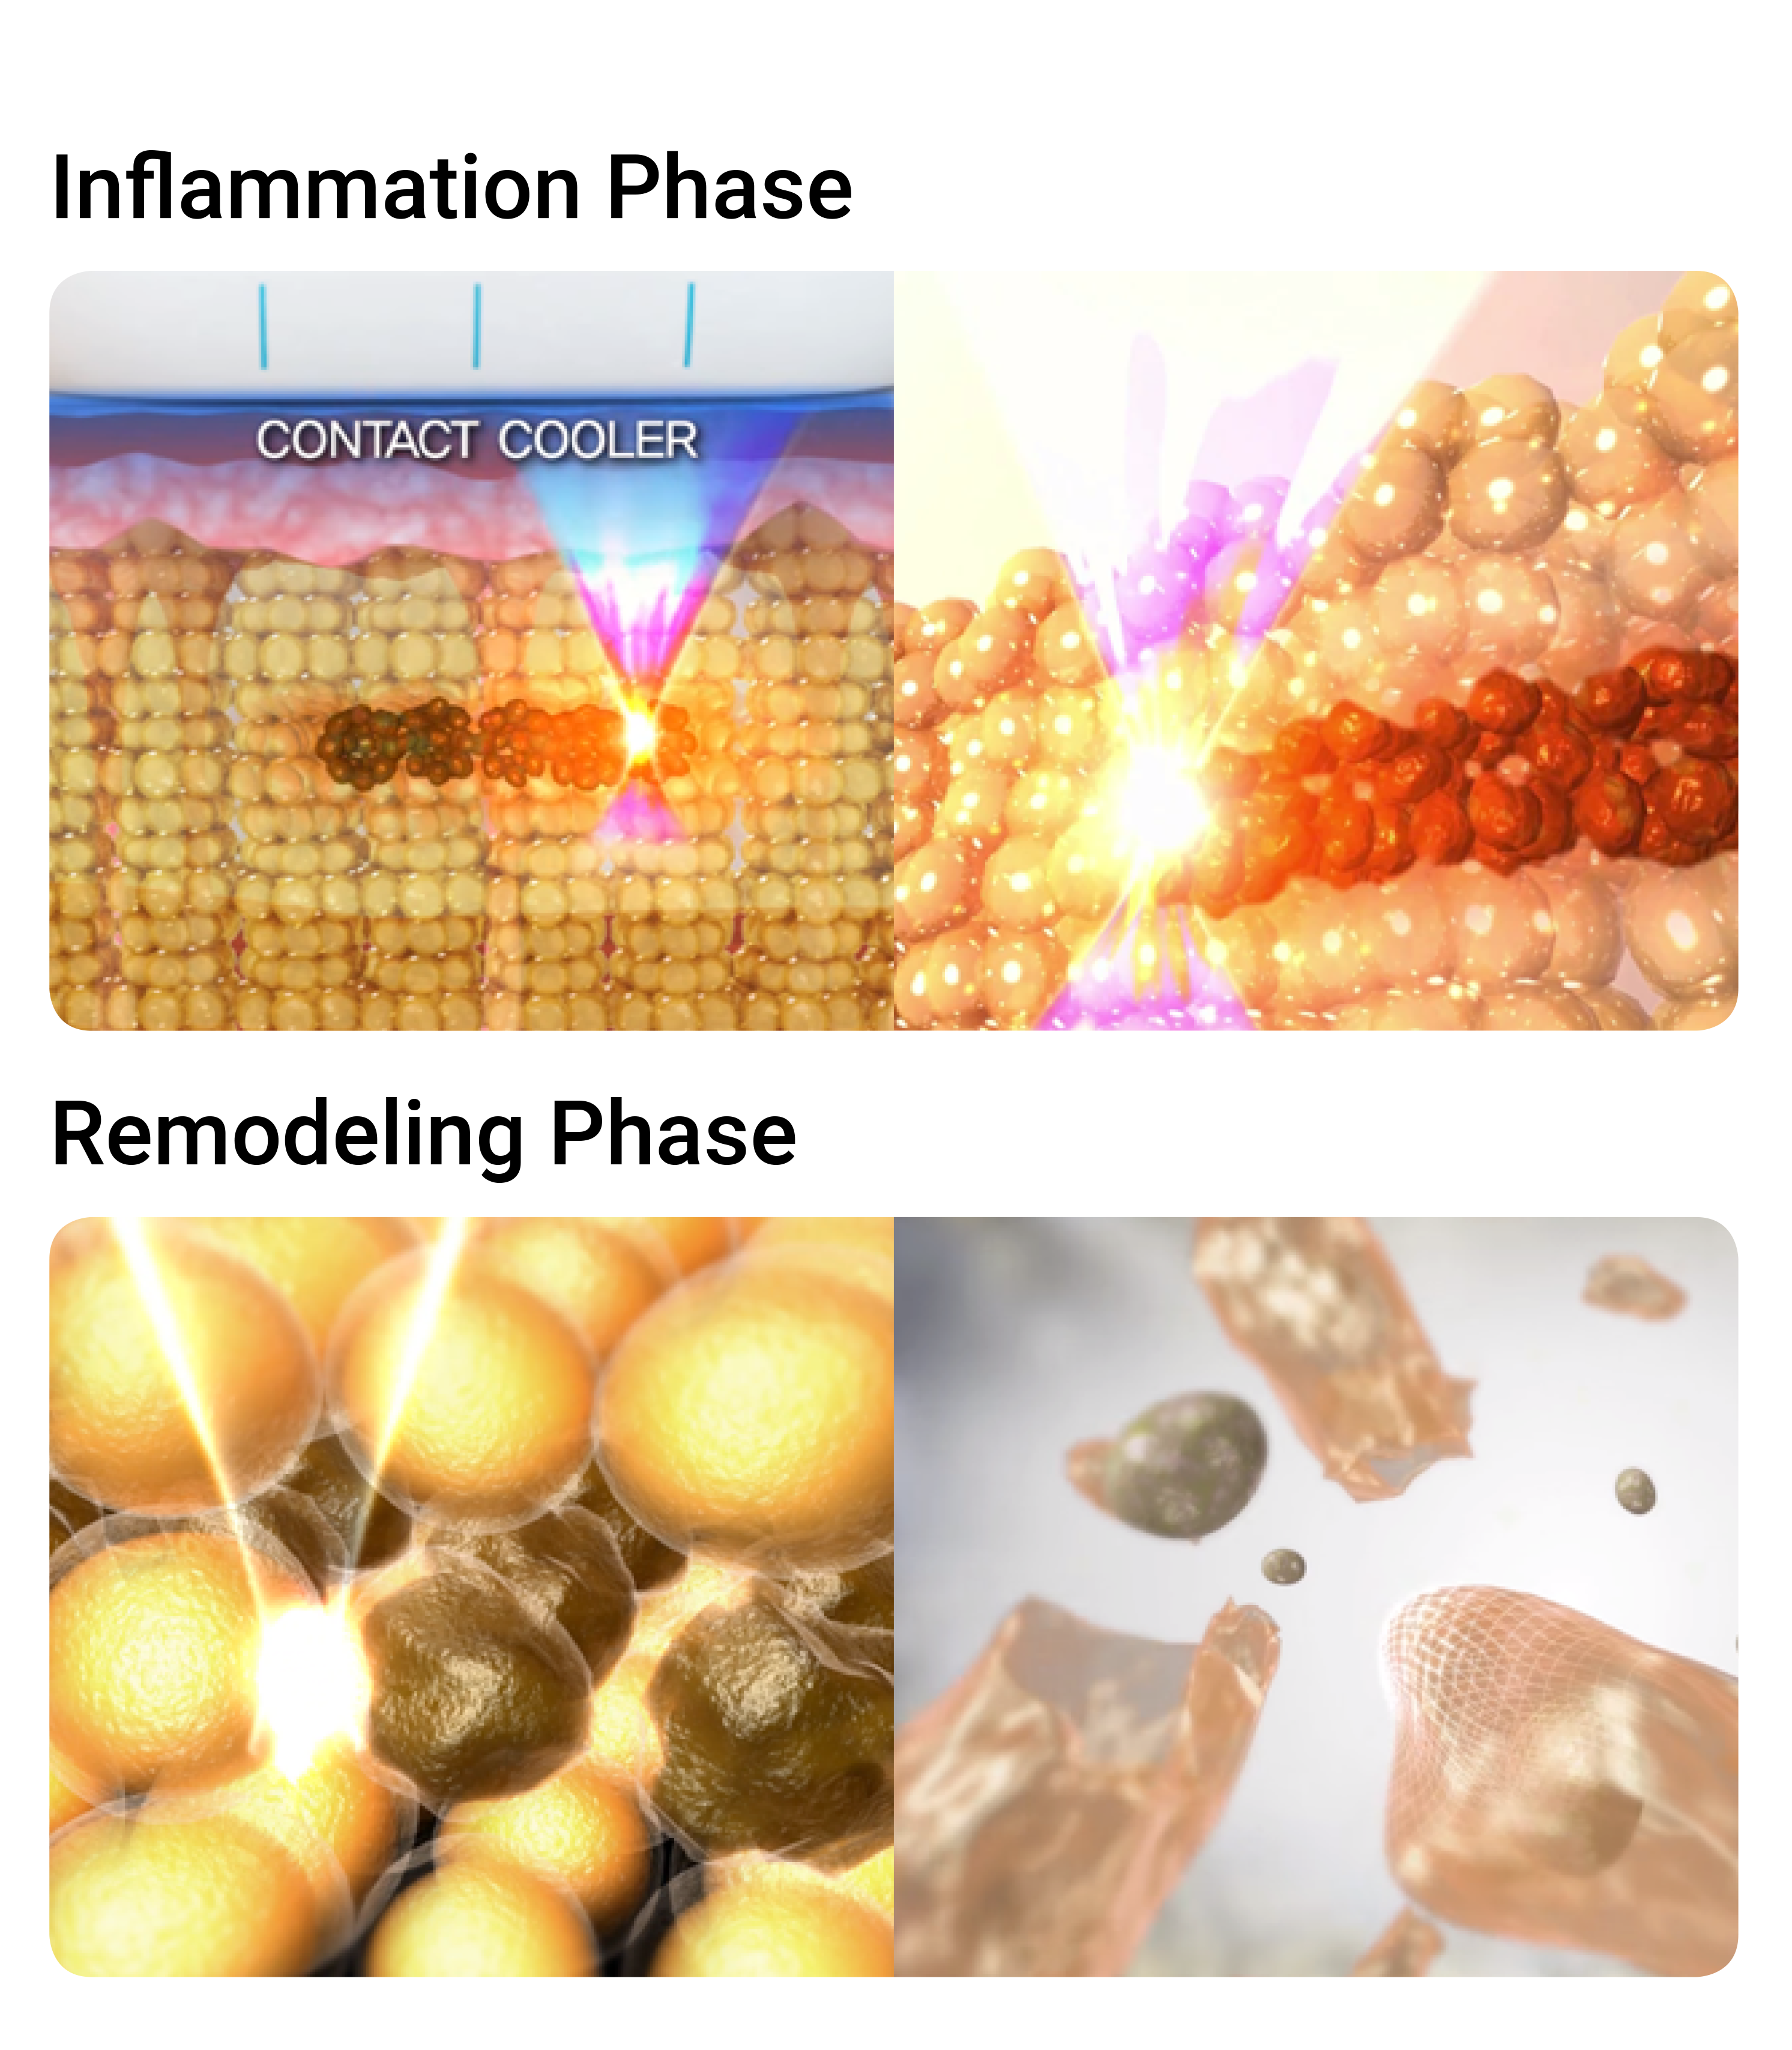 Inflammation and Remodeling Phase